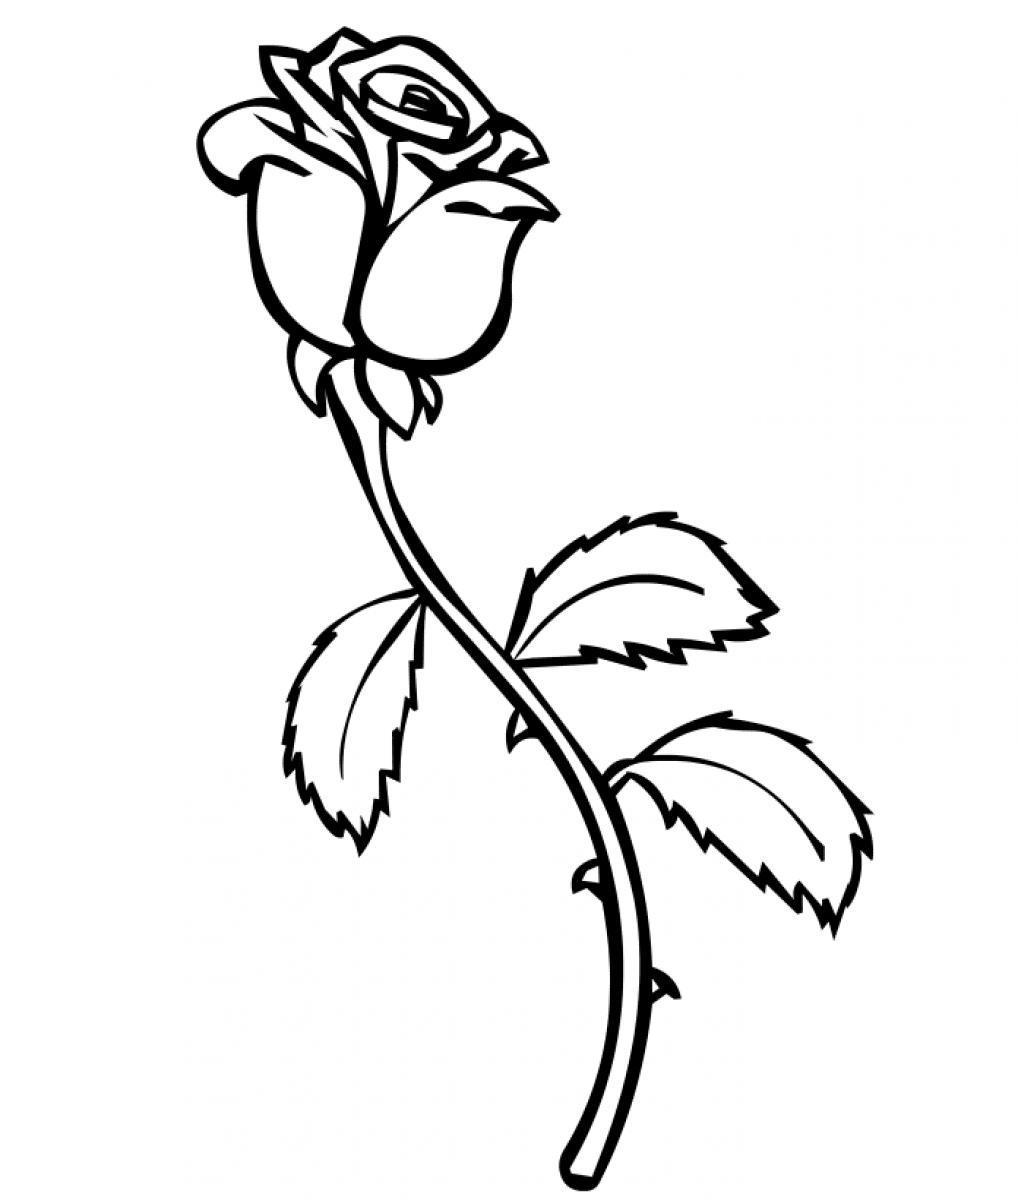 Rose Coloring Sheets. summer rose coloring sheets for kids. hearts ...